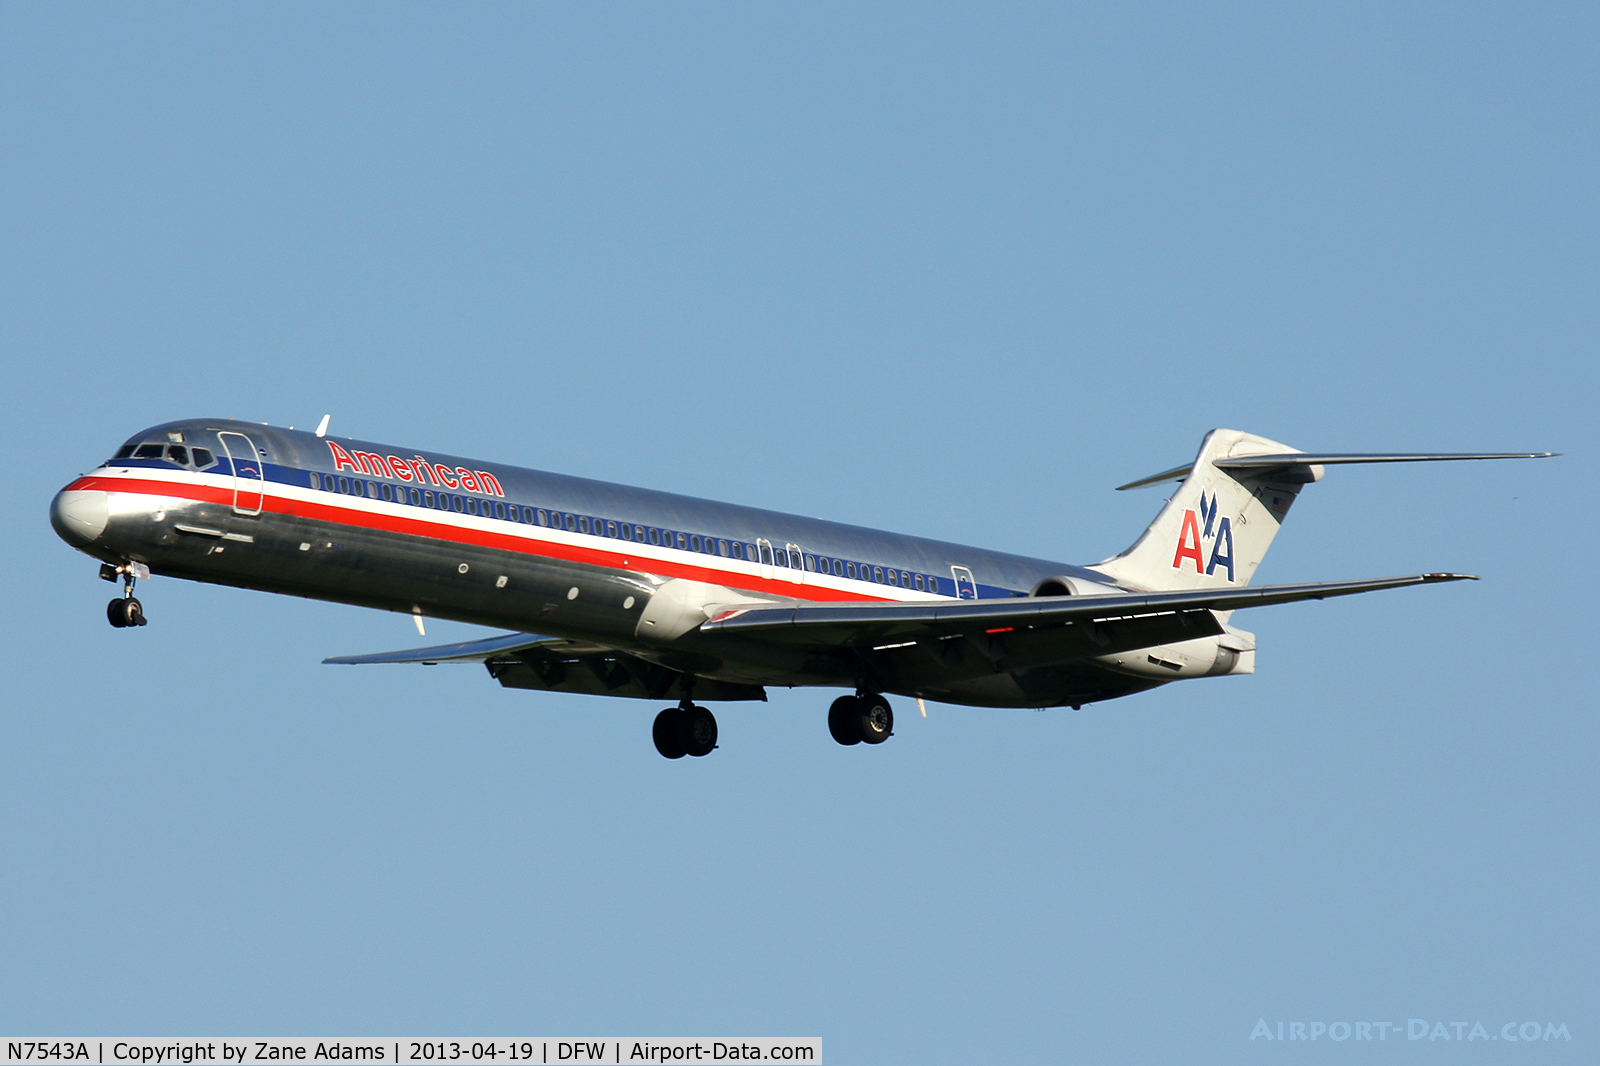 N7543A, 1990 McDonnell Douglas MD-82 (DC-9-82) C/N 53025, American Airlines landing at DFW Airport